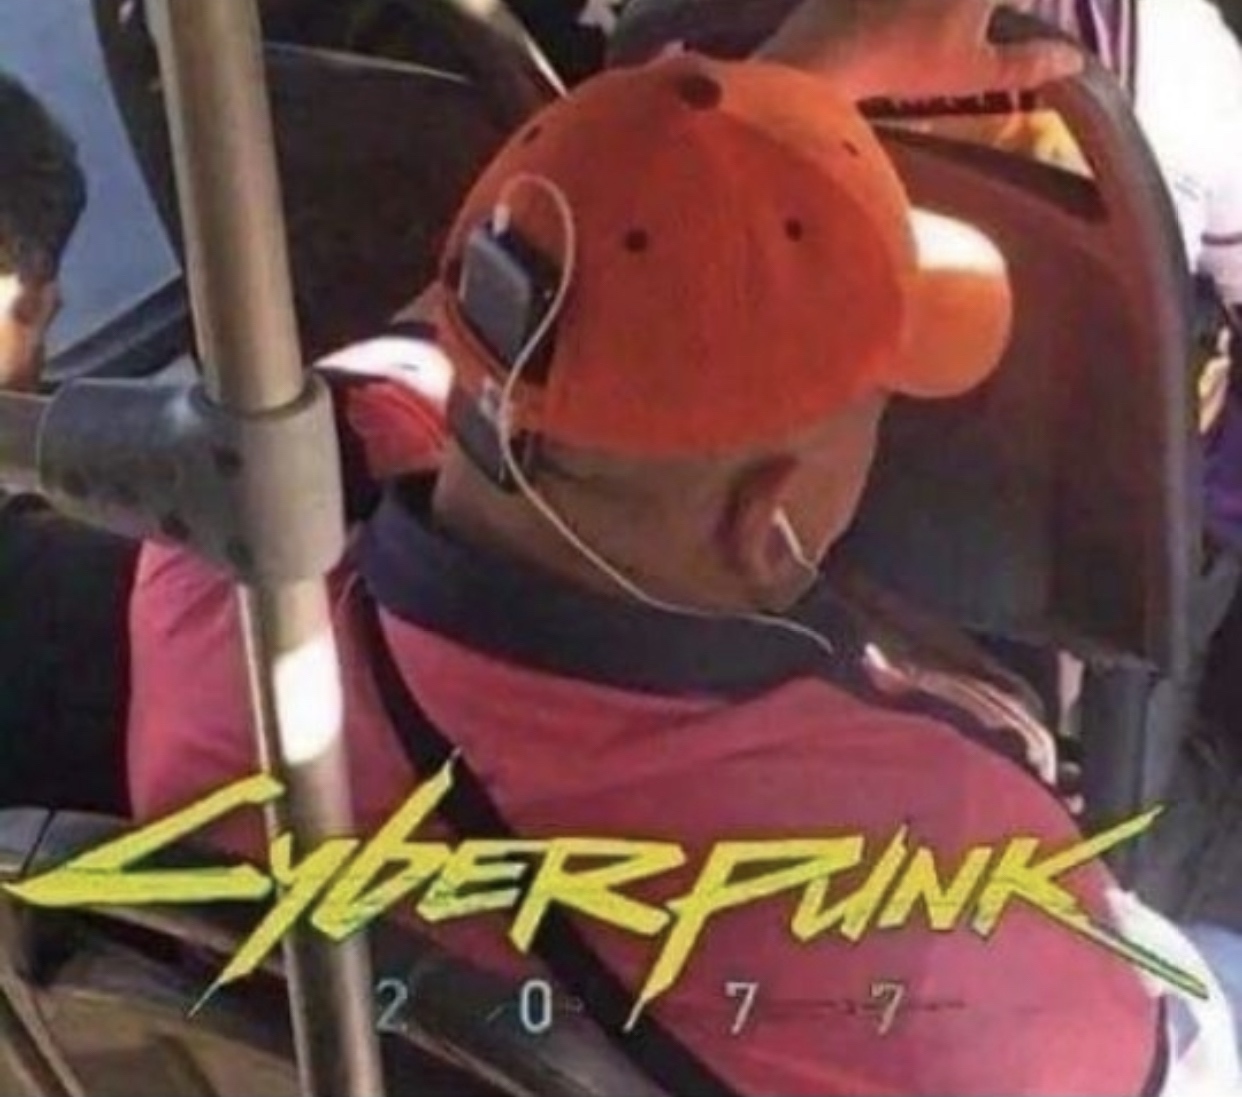 cyberpunk 2077 - iPhone stuck in hat used to hold it